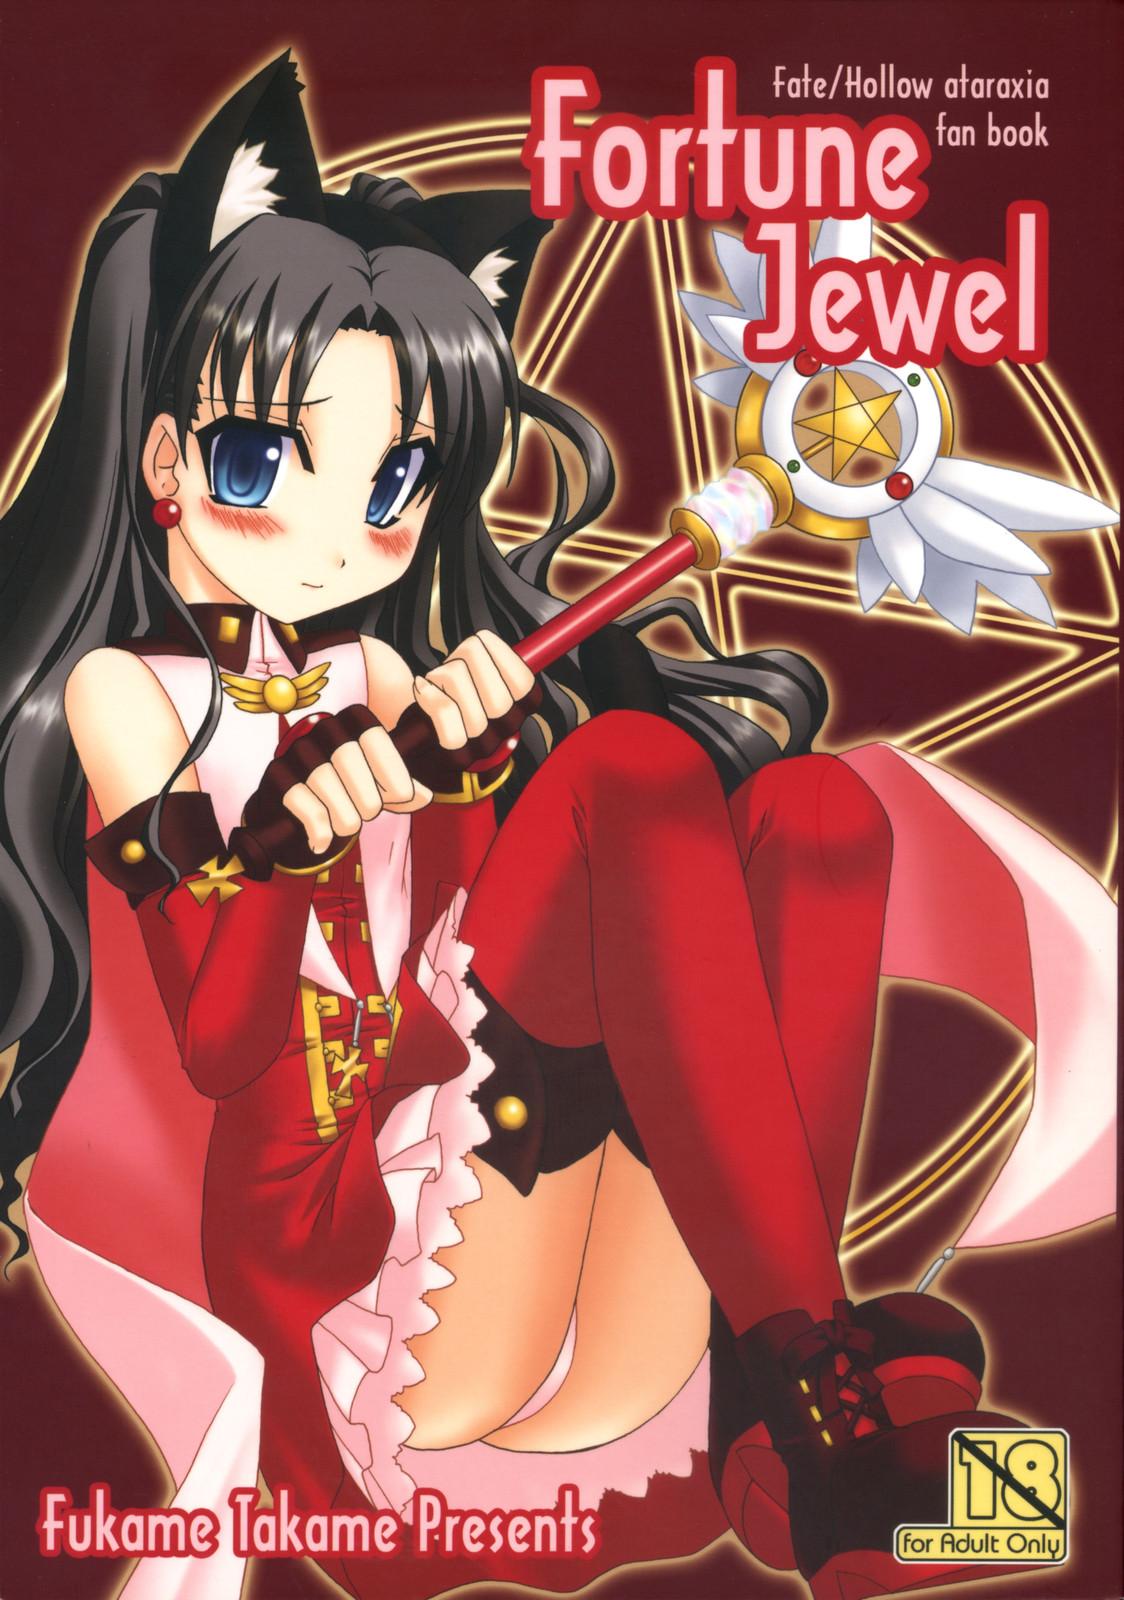 Price Fortune Jewel - Fate stay night Fate hollow ataraxia Petera - Page 1